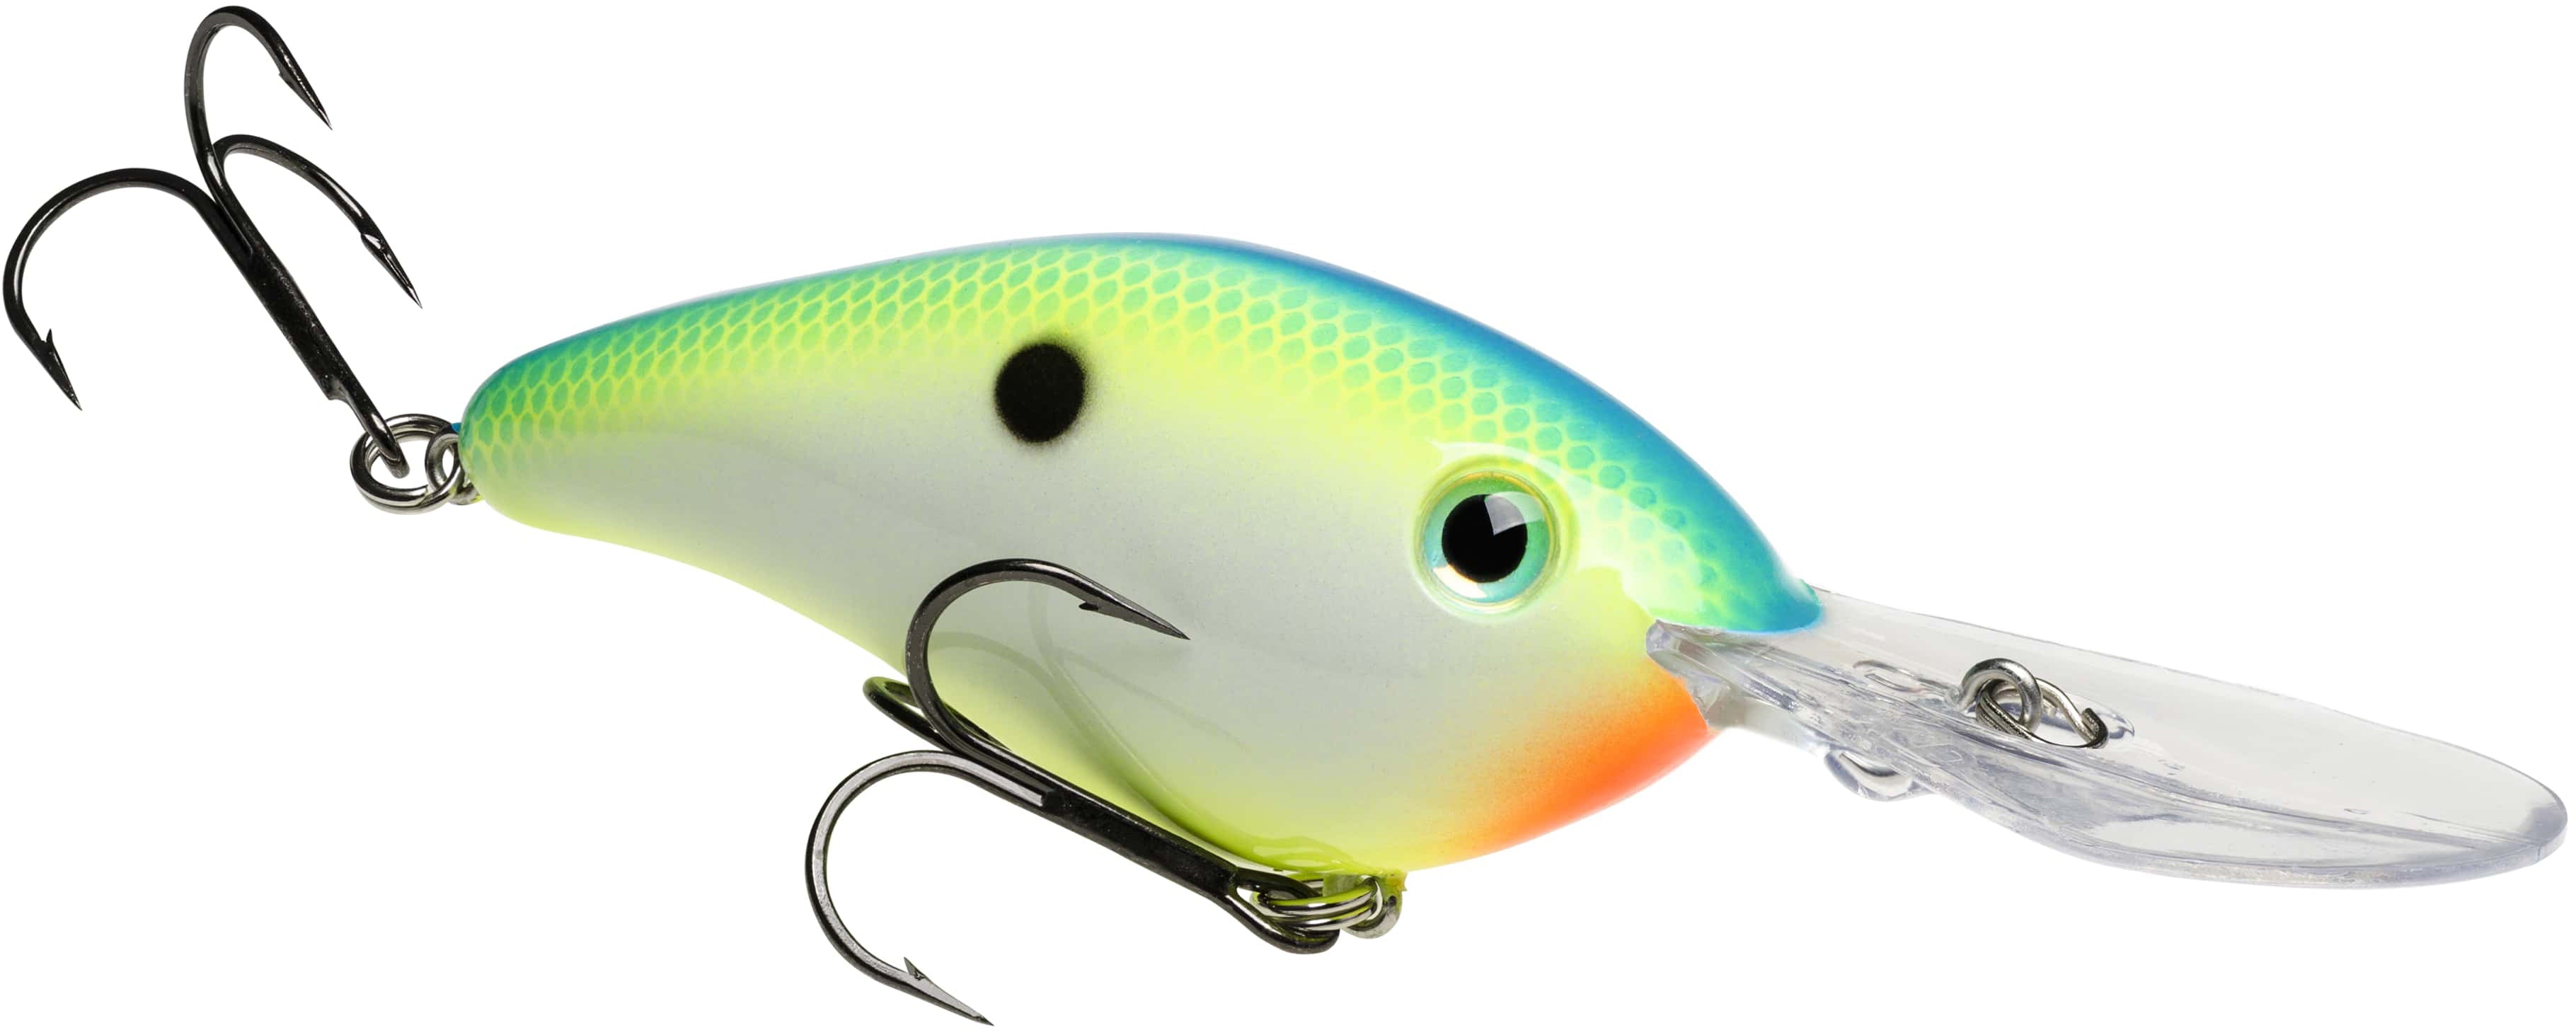 Bass Pro Shops Boss Shad Delivers 